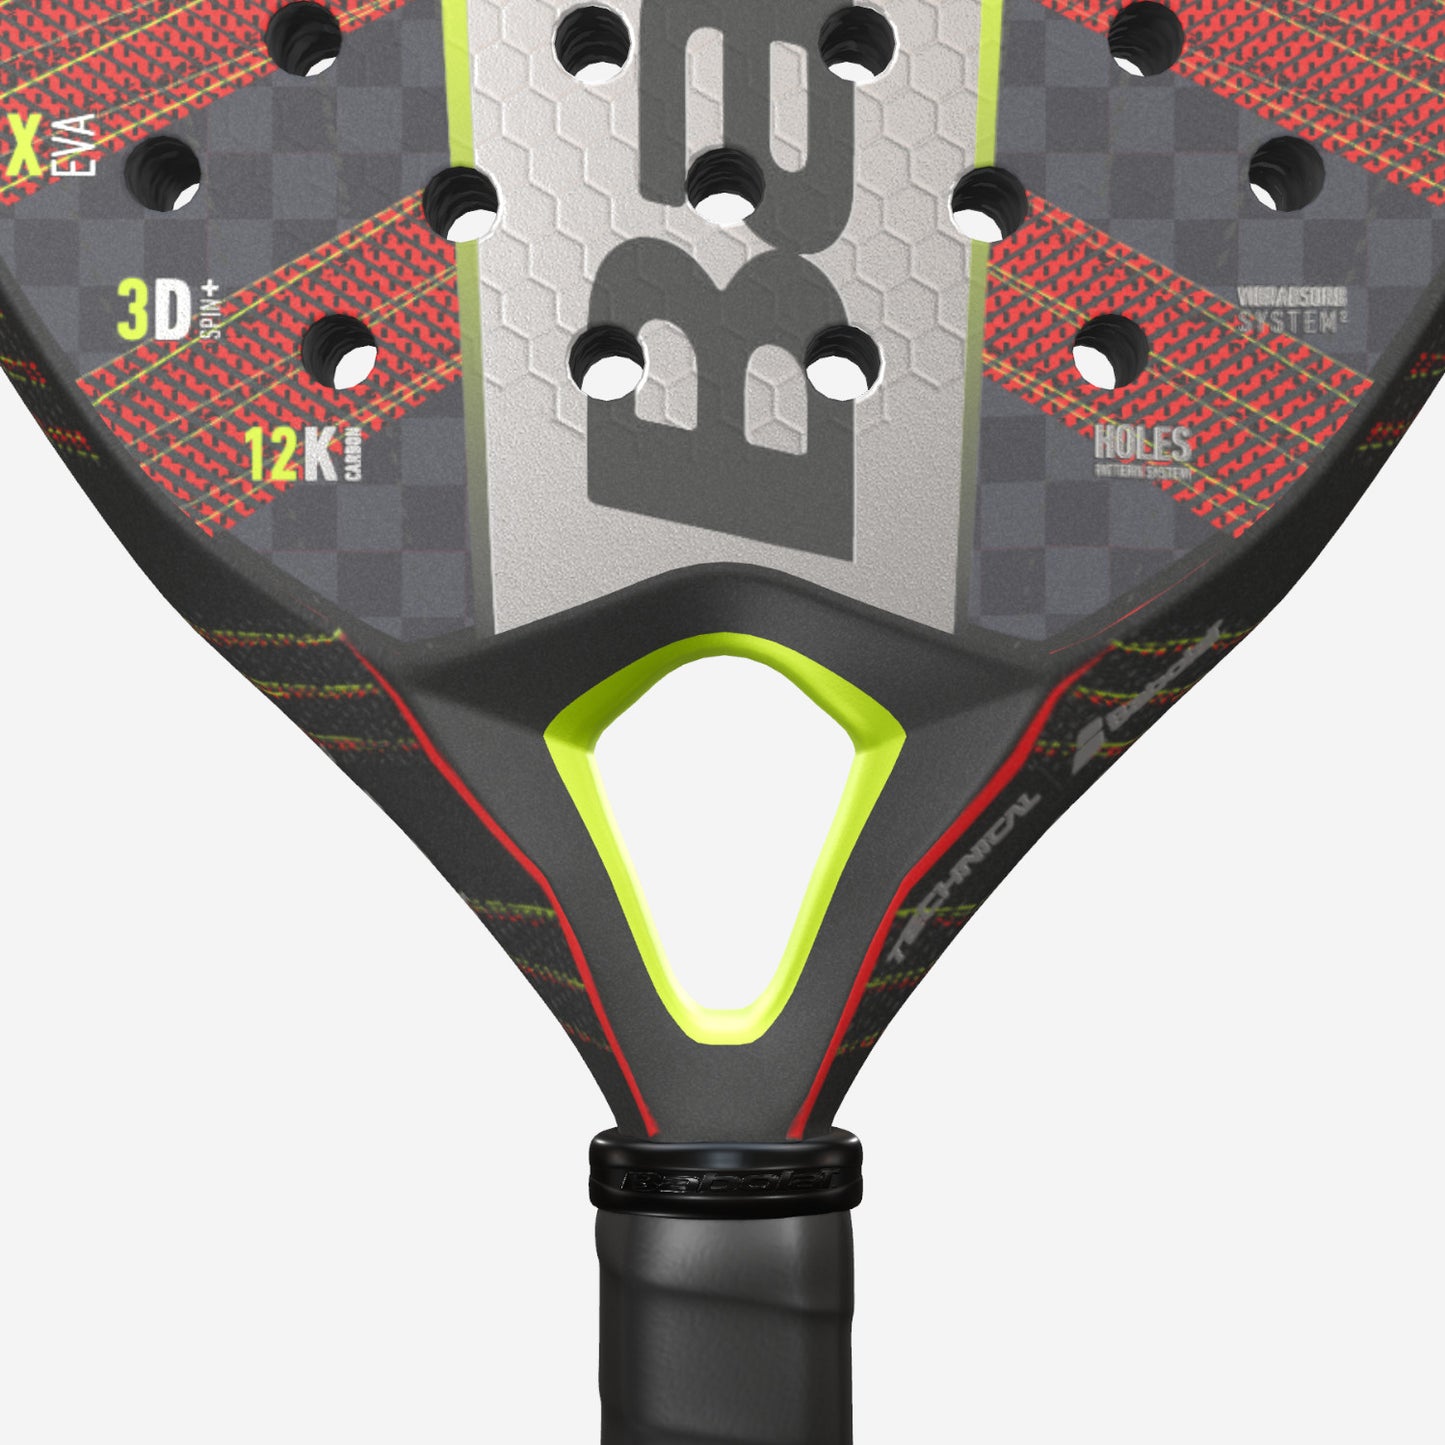 Throat image of the Babolat Technical Viper 2023 padel racket on sale at Thepadelshop.co.nz